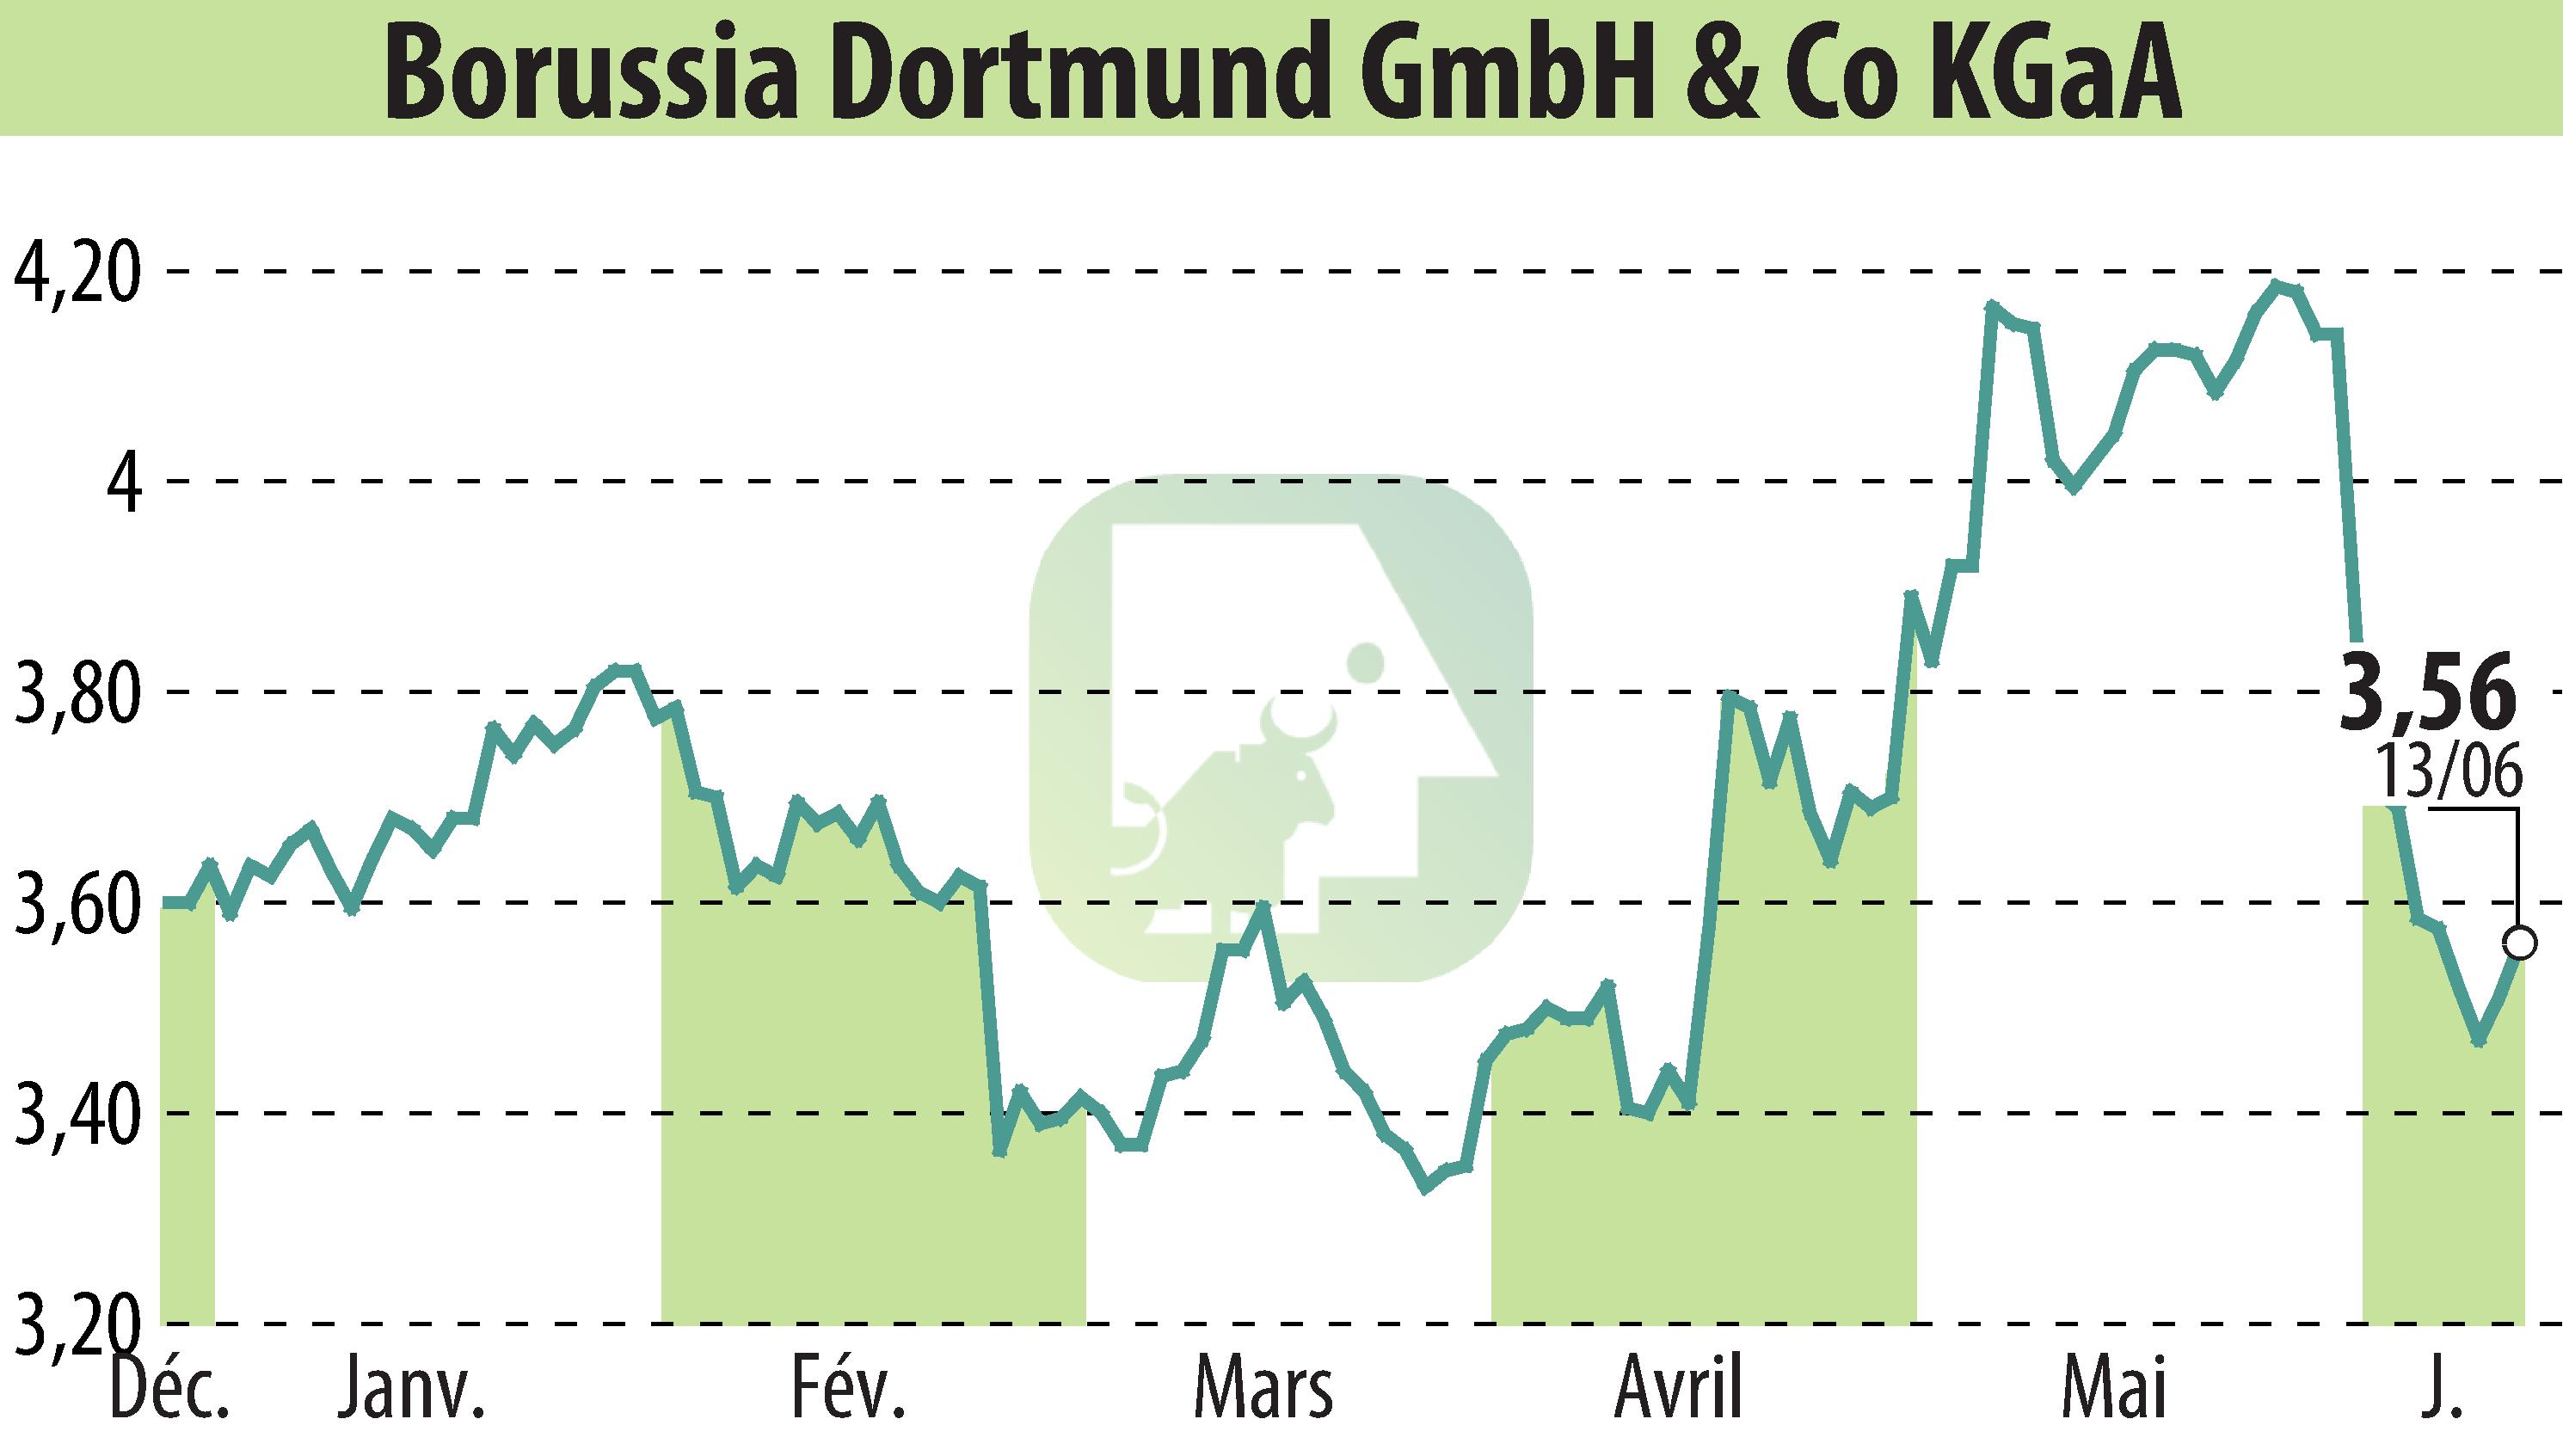 Stock price chart of Borussia Dortmund GmbH & Co. KGaA (EBR:BVB) showing fluctuations.